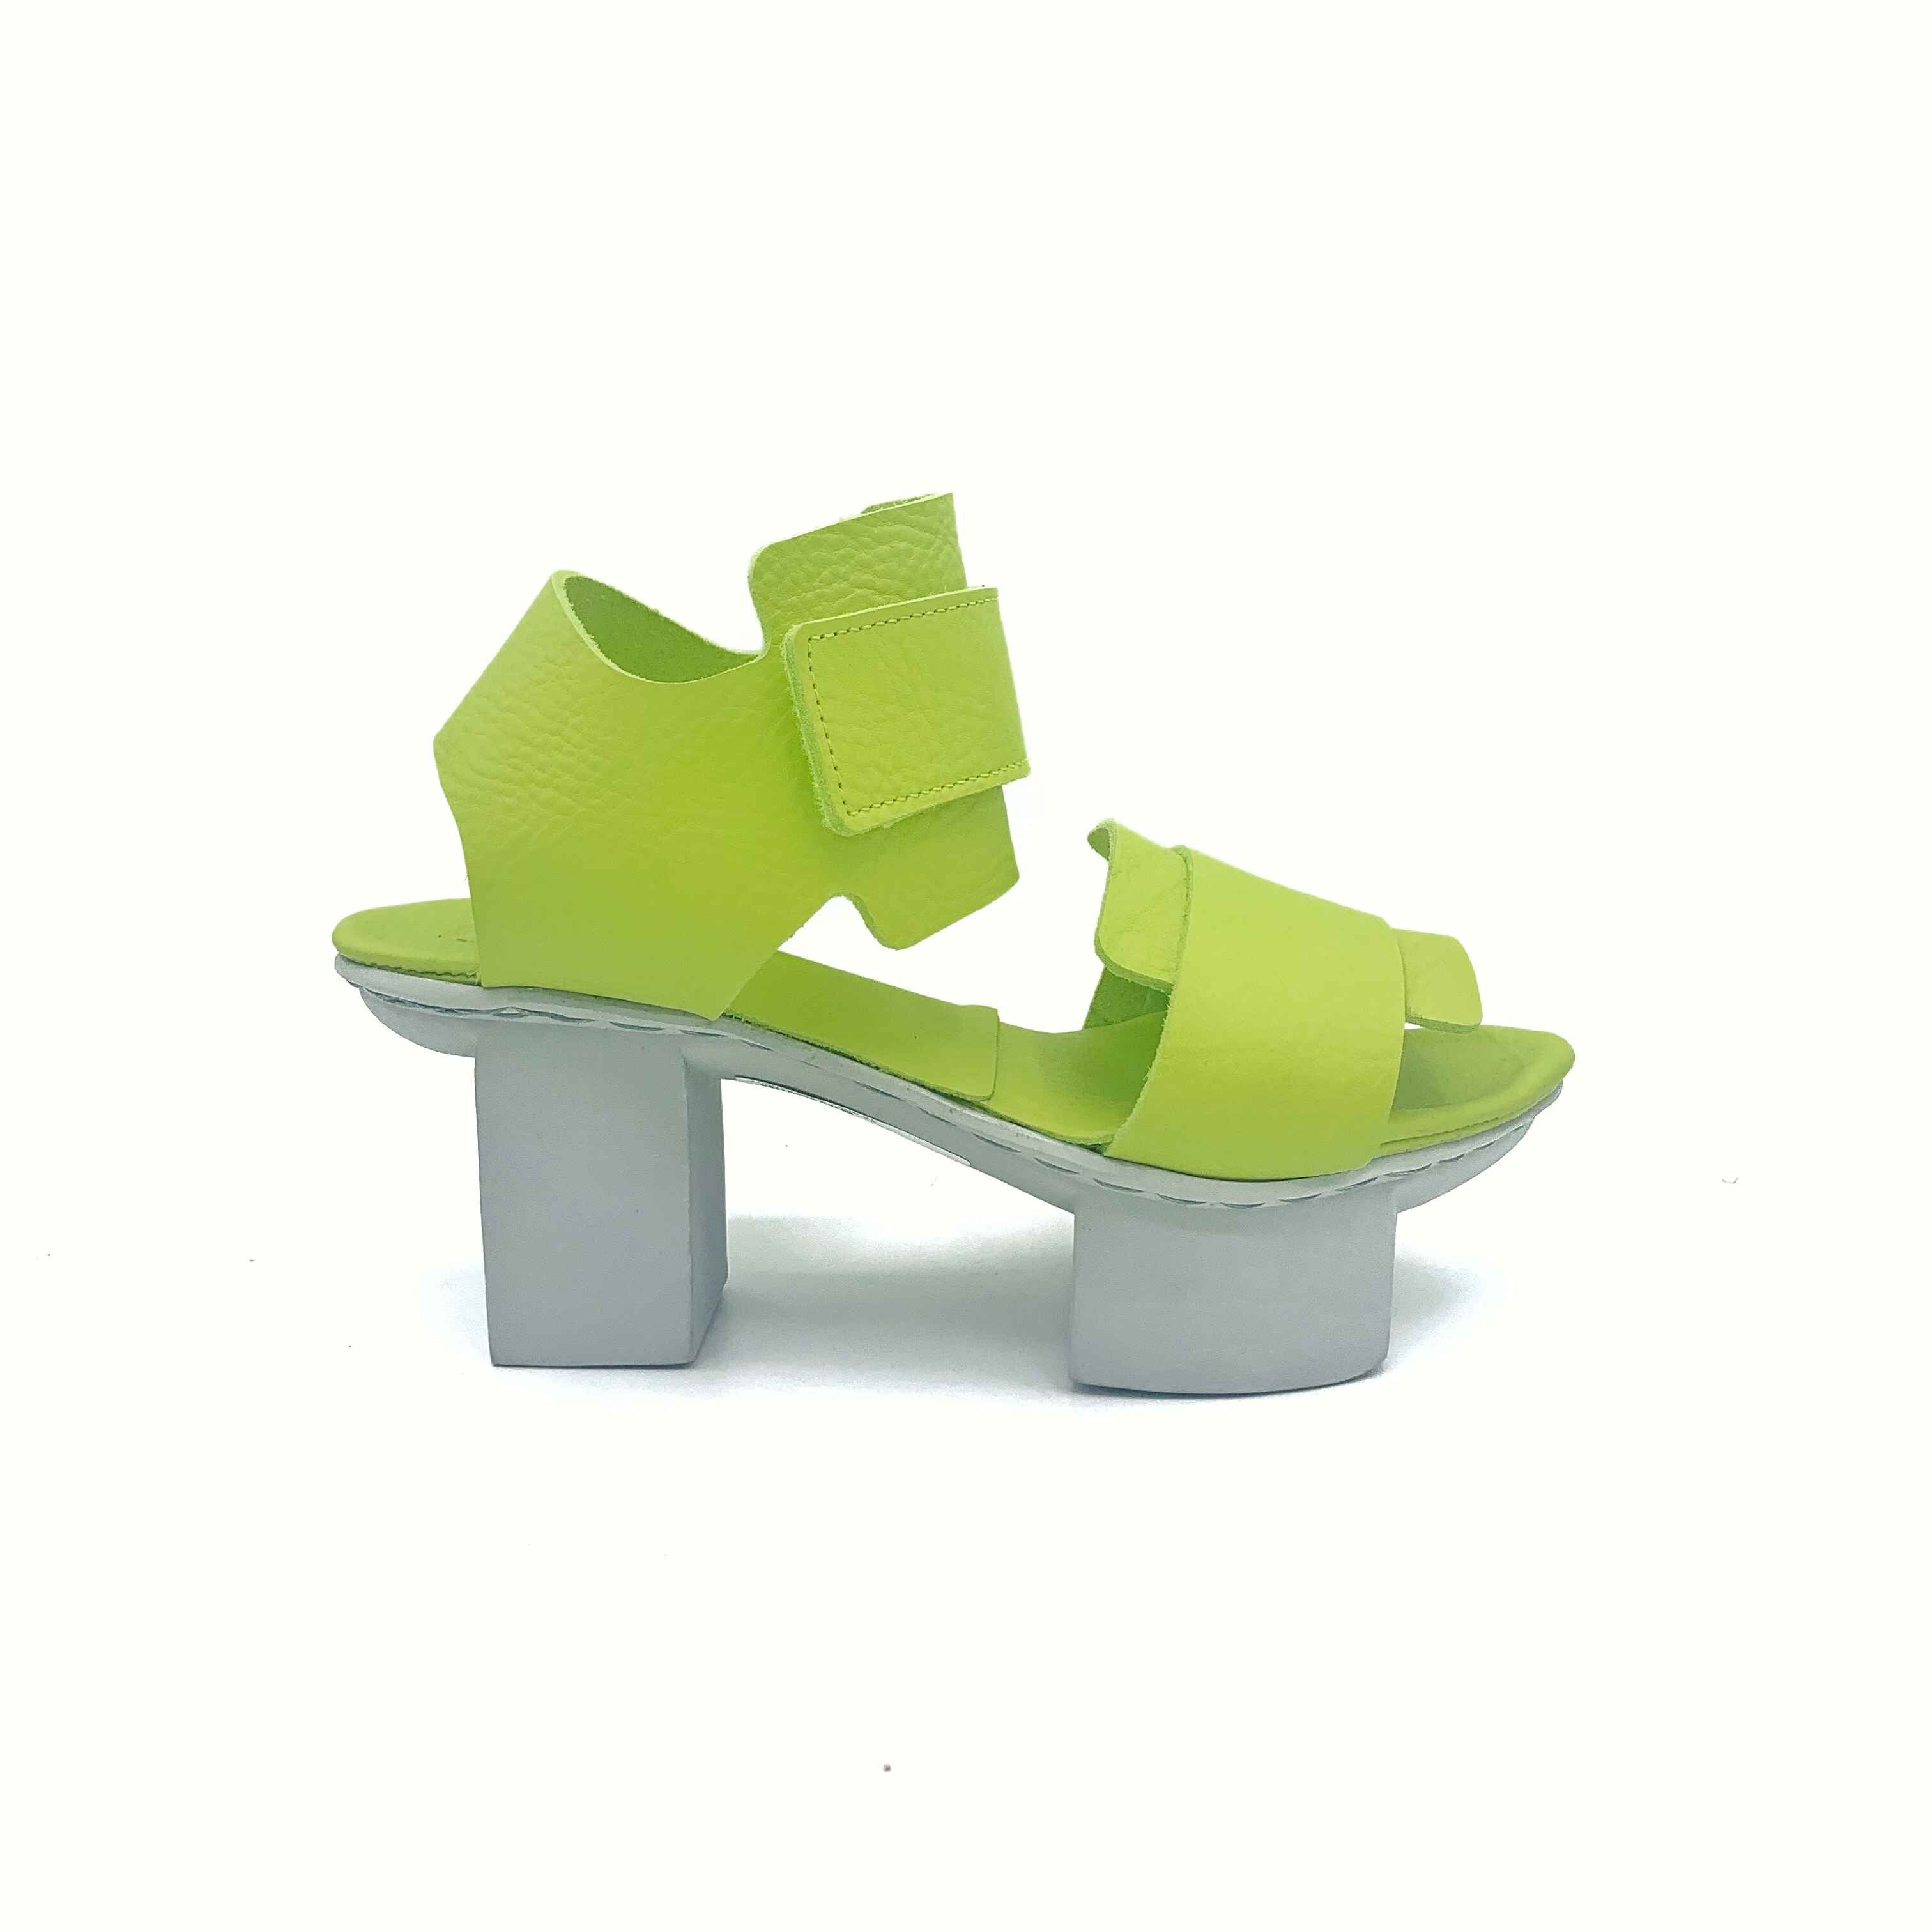 Outer side view of the trippen visor shoe in the color lime with a white sole.